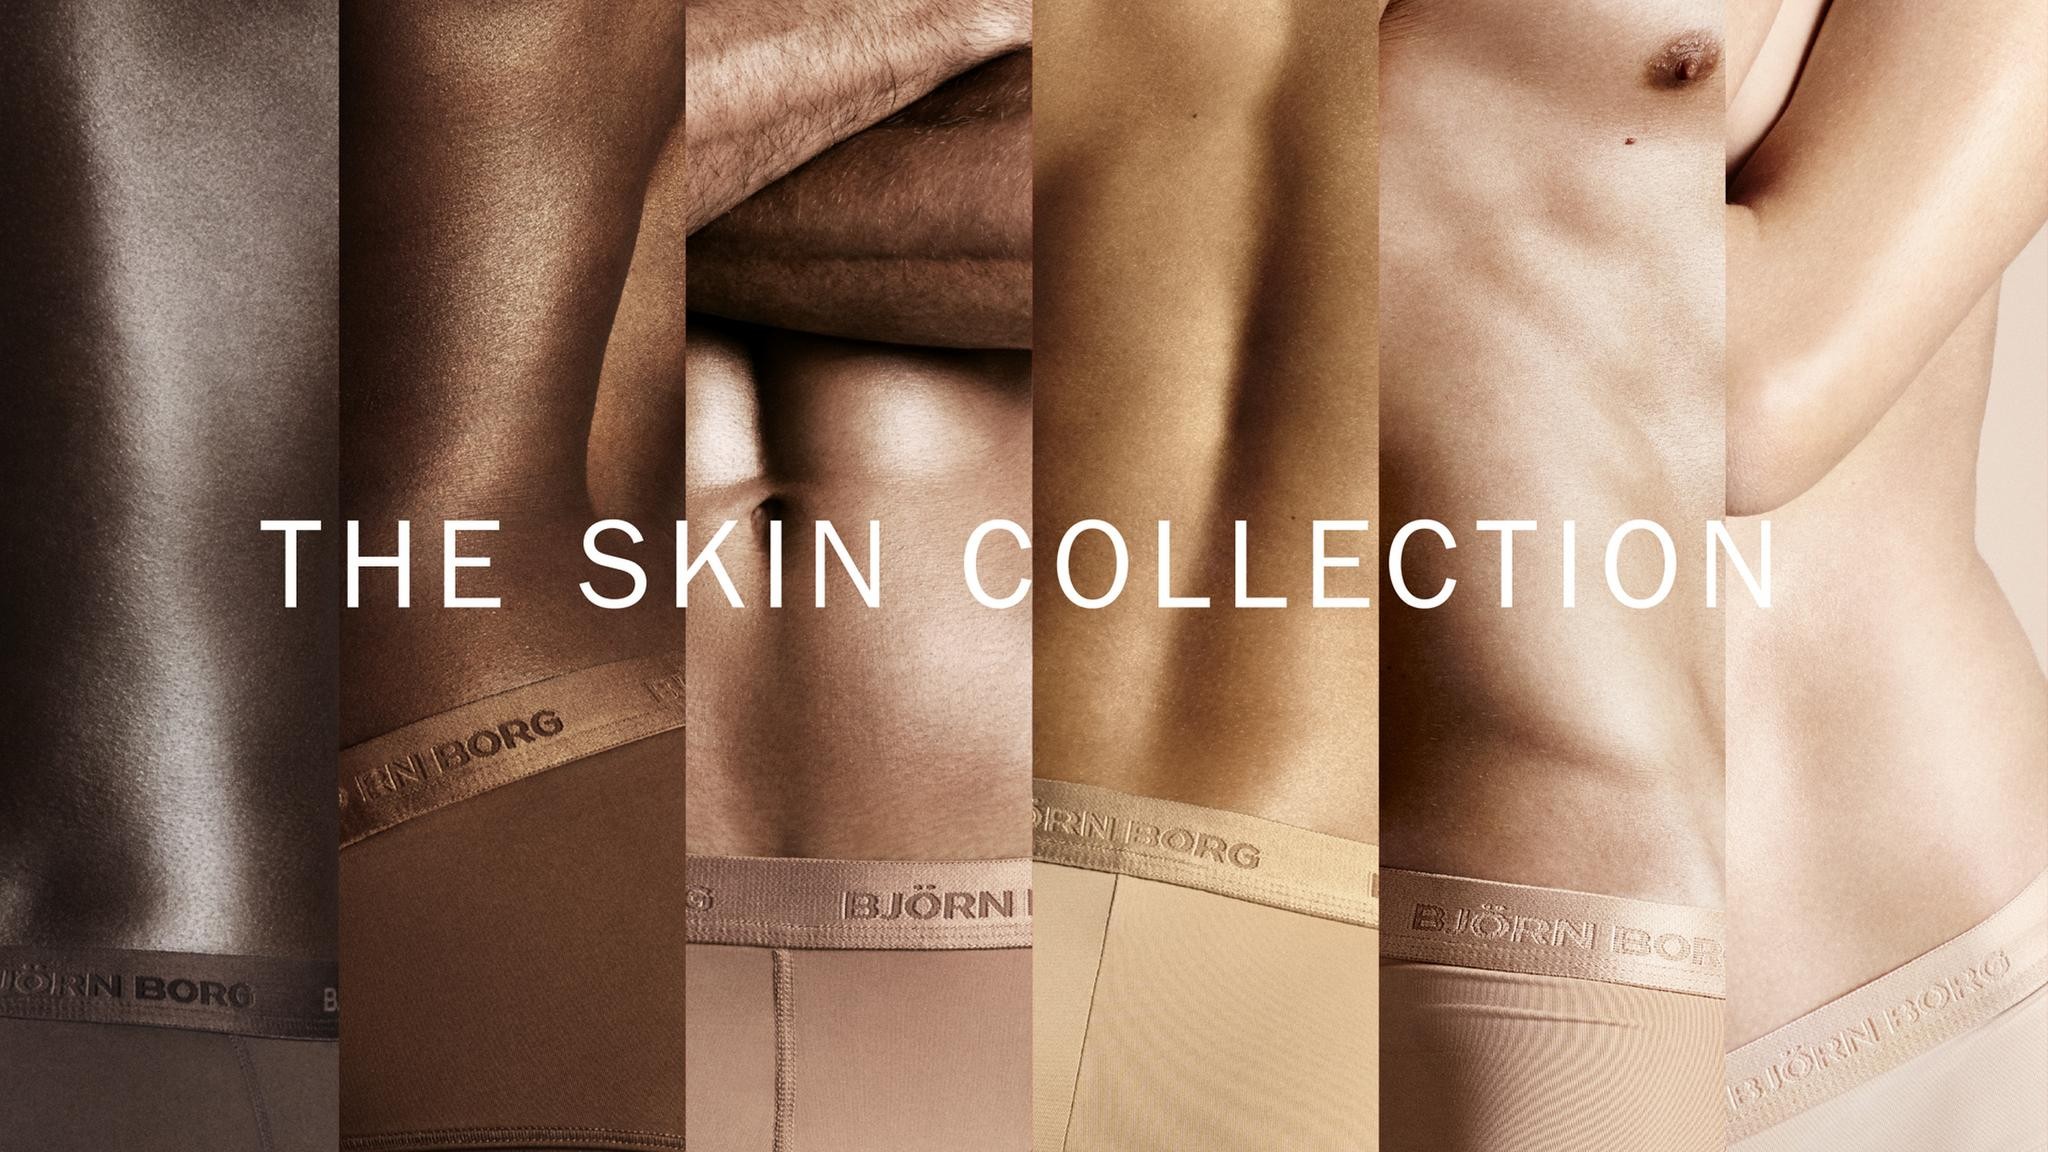 The skin collection